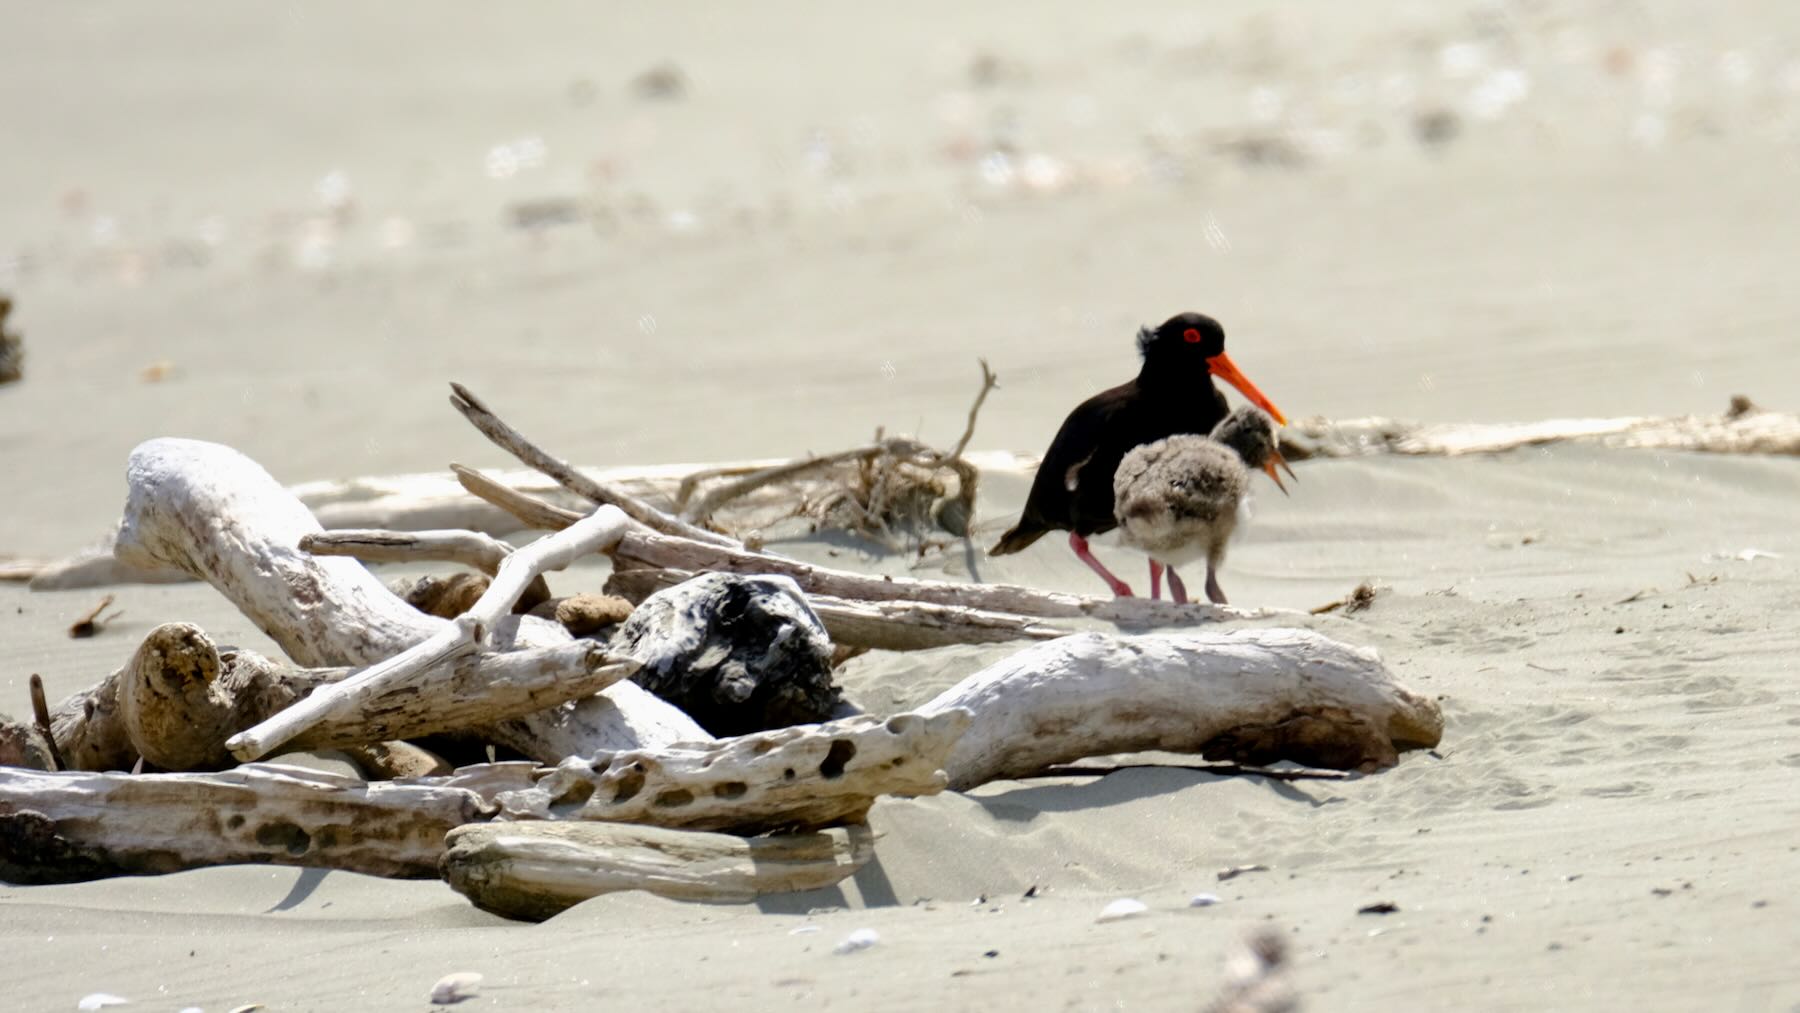 Oystercatcher with chick amongst small pieces of driftwood. 